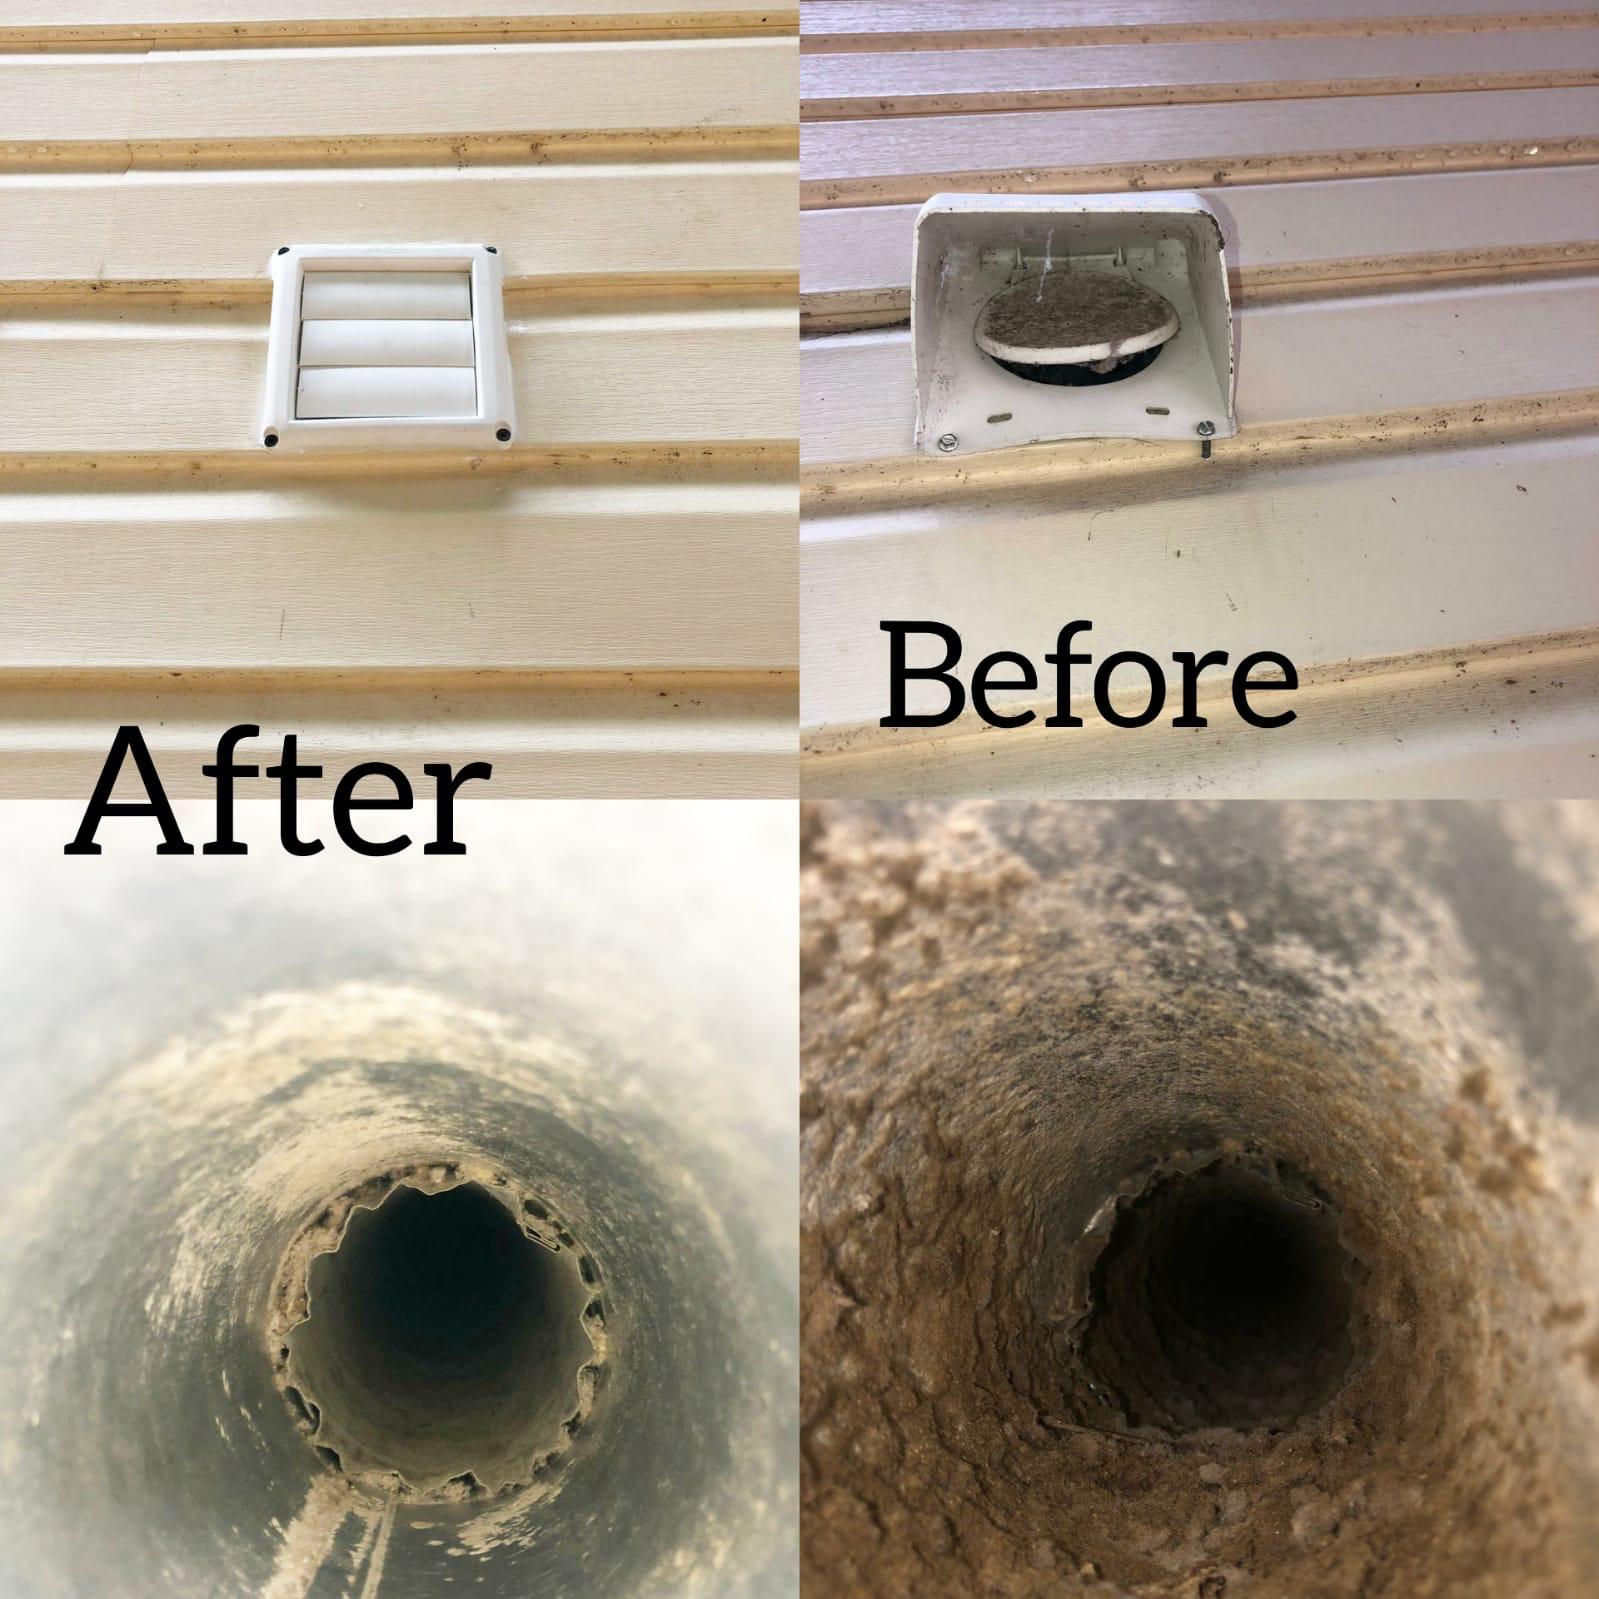 How to find the best dryer vent cleaning service near me